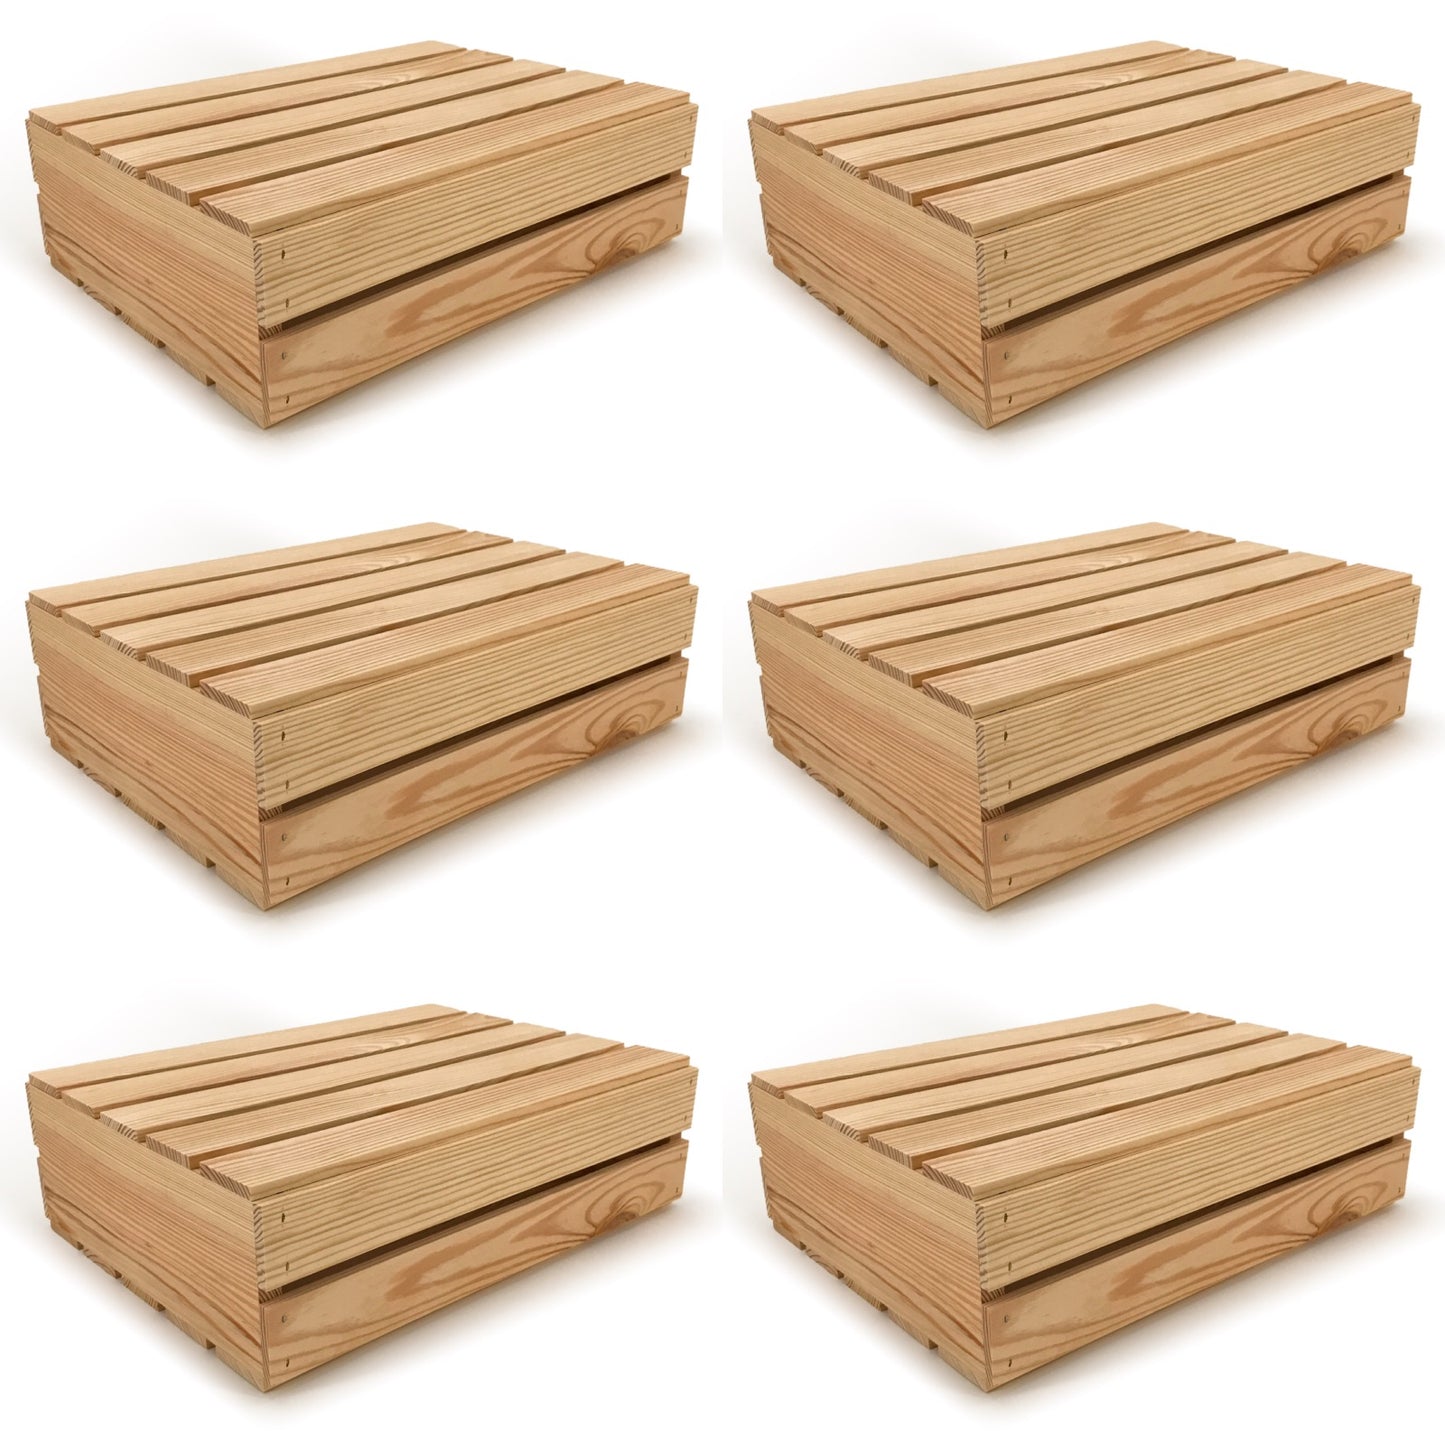 6 Small wooden crates with lid 18x14x5.25, 6-WS-18-14-5.25-NX-NW-LL, 12-WS-18-14-5.25-NX-NW-LL, 24-WS-18-14-5.25-NX-NW-LL, 48-WS-18-14-5.25-NX-NW-LL, 96-WS-18-14-5.25-NX-NW-LL